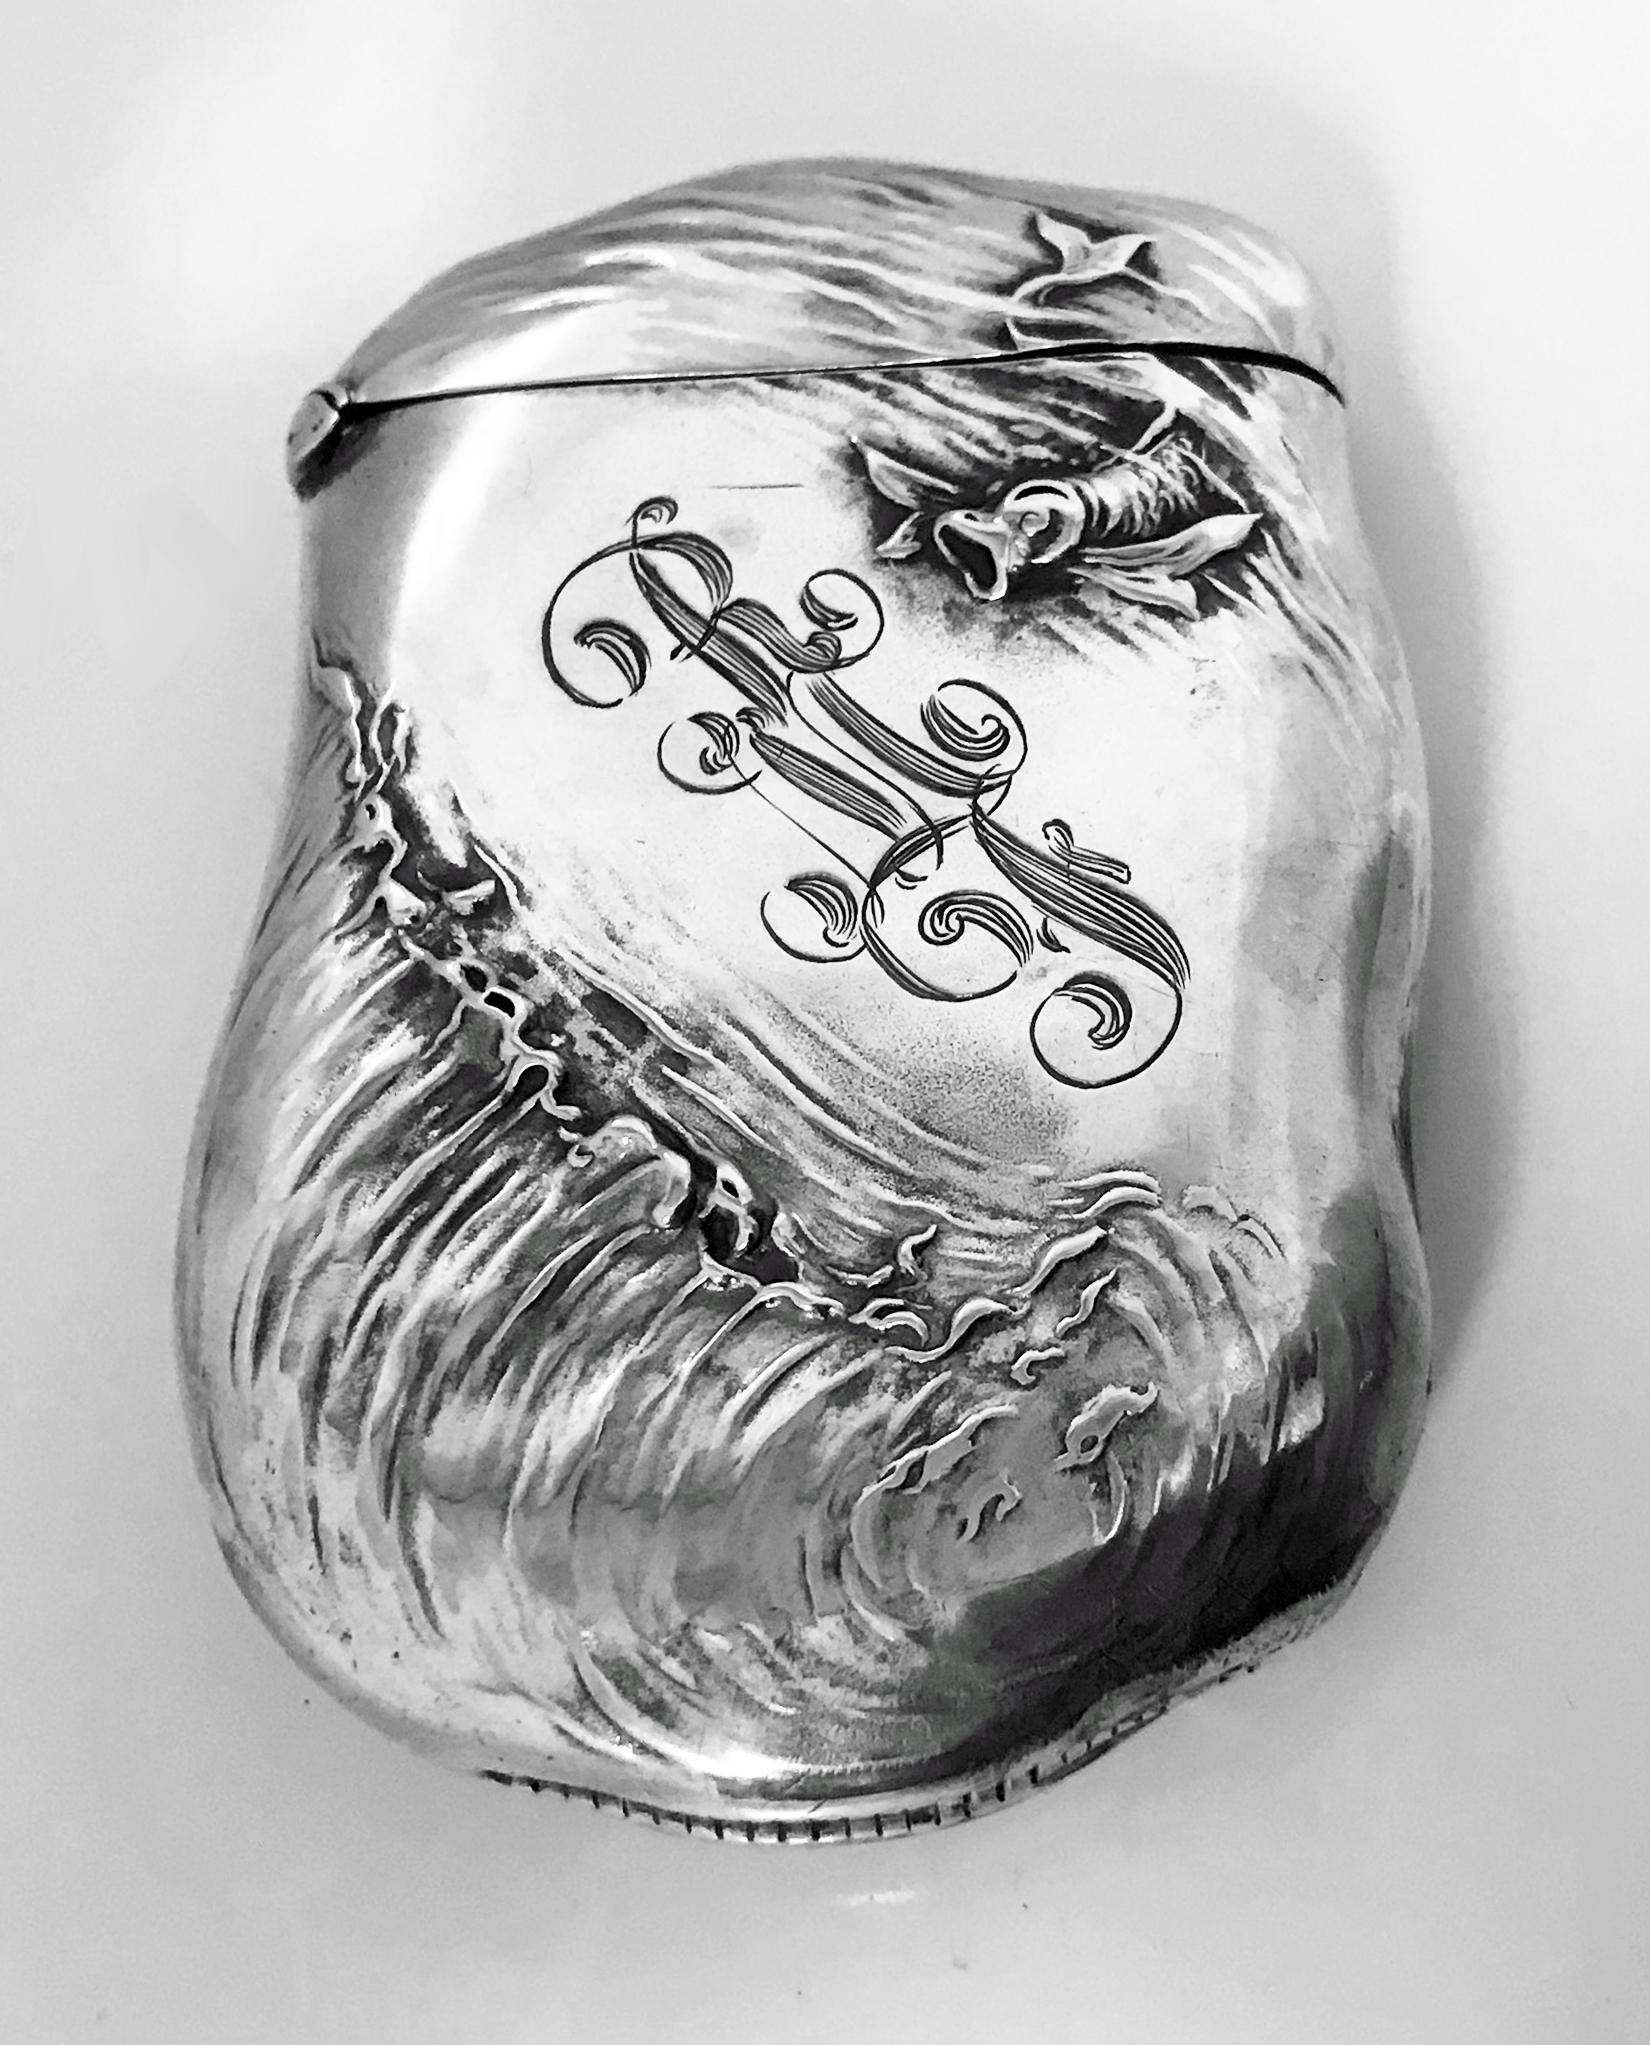 Fine quality Art Nouveau sterling silver vesta match safe, William Kerr circa 1900. Repousse relief depicting as the central theme on one side, an attractive nude female being adored and pursued by a male suitors frolicking in waves with fish